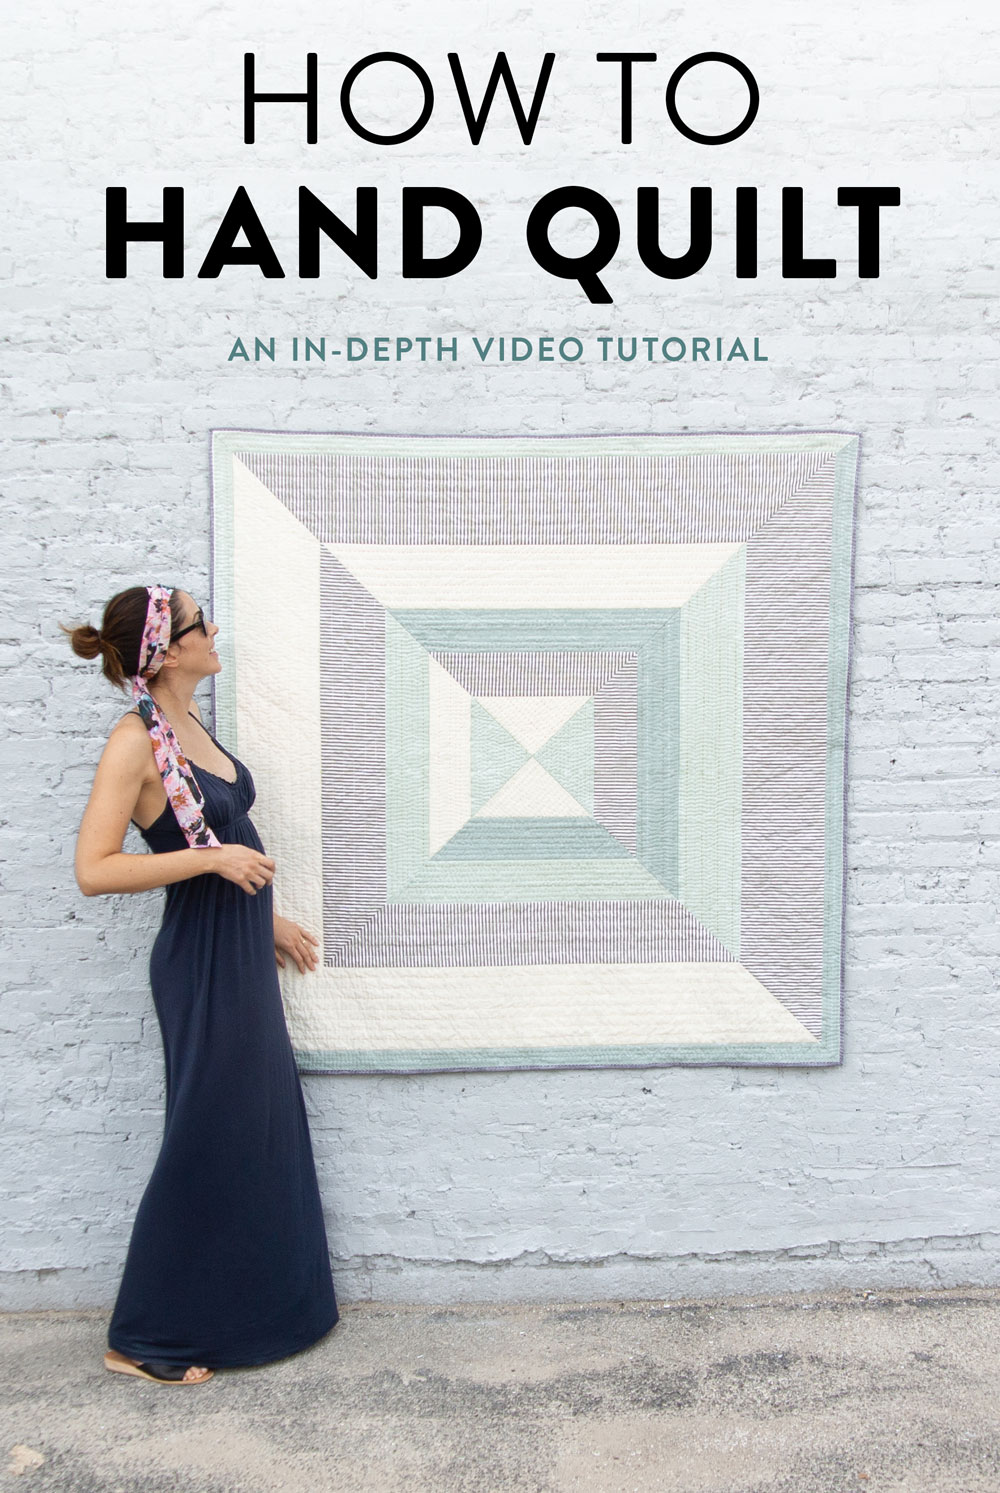 How to hand quilt in 3 easy steps! In this blog and video tutorial I'll list out all of the supplies you need and show you how simple hand quilting can be.